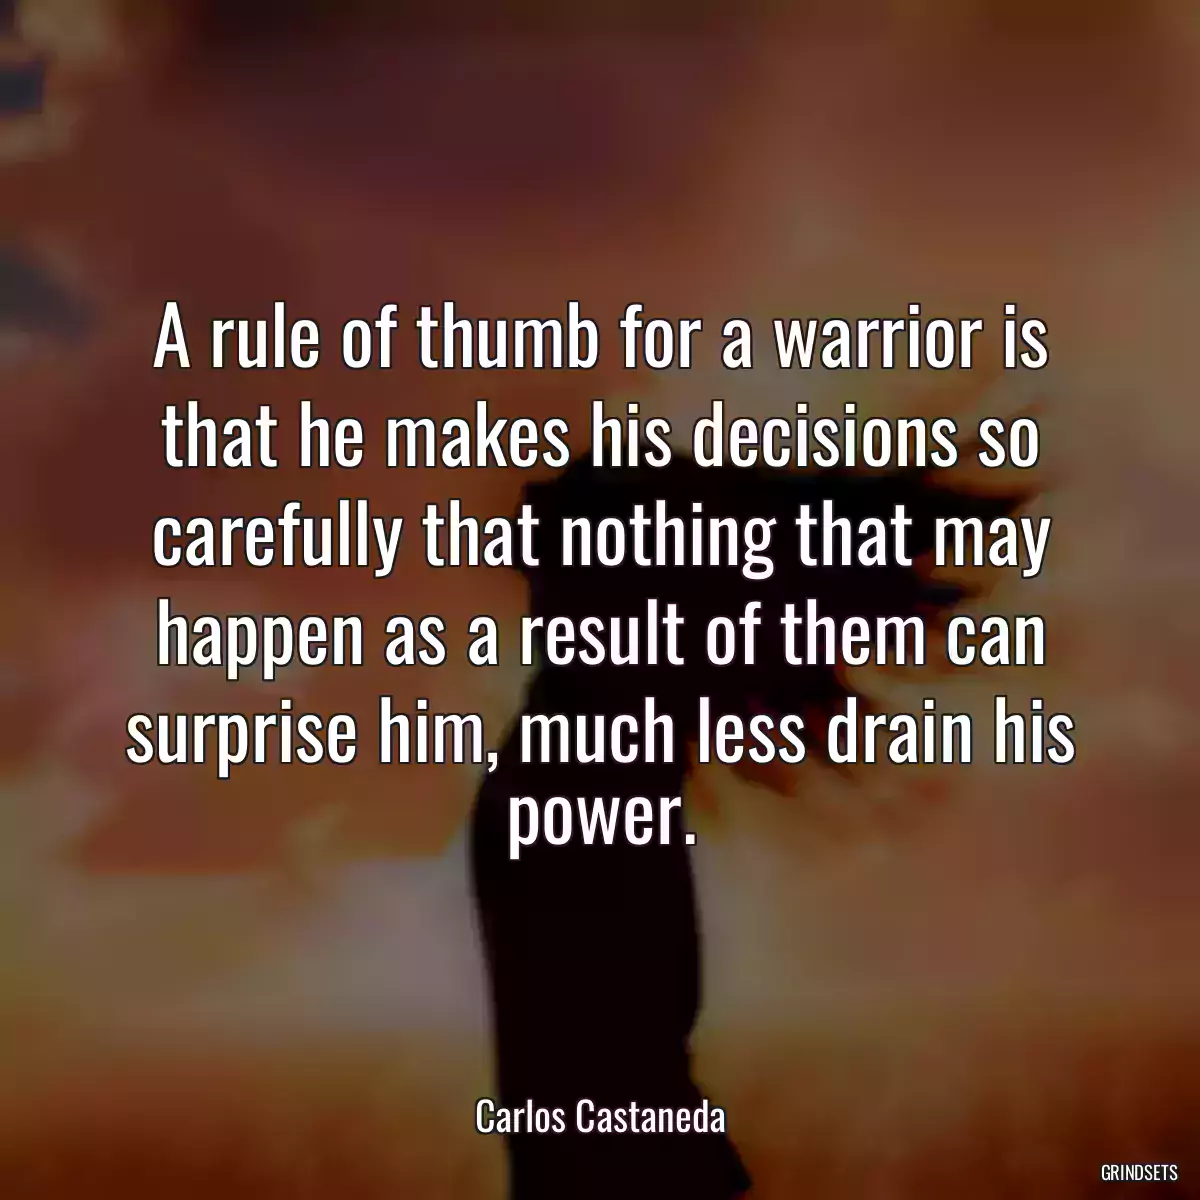 A rule of thumb for a warrior is that he makes his decisions so carefully that nothing that may happen as a result of them can surprise him, much less drain his power.